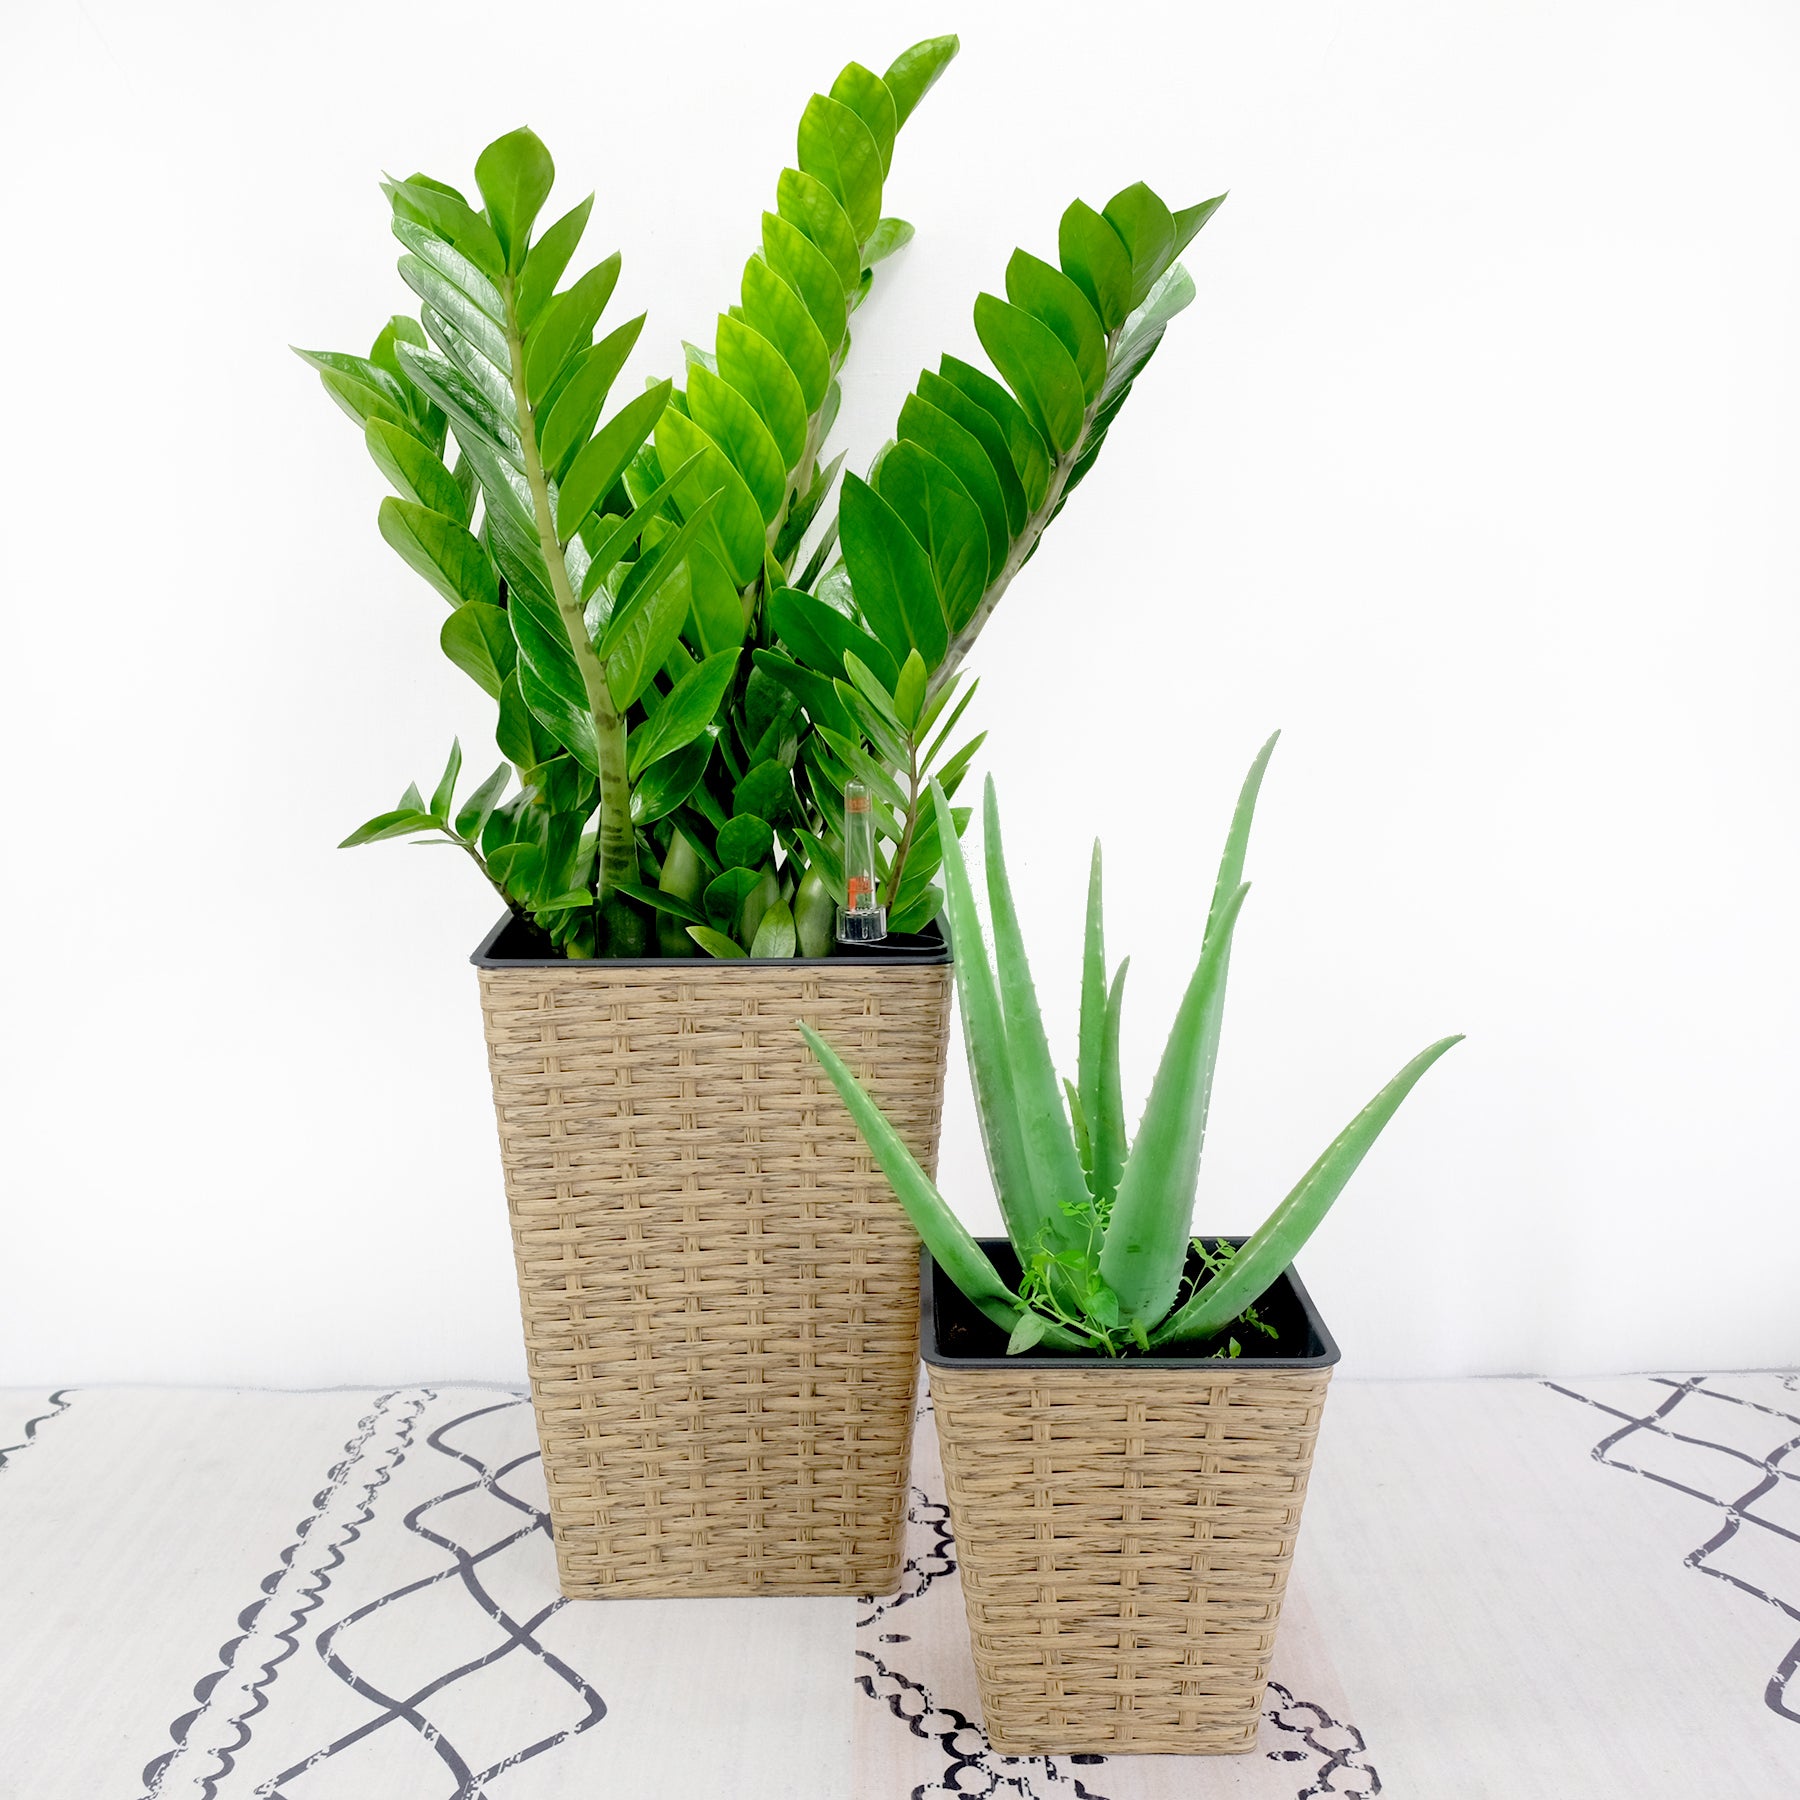 2-Pack-Smart-Self-watering-Square-Planter-for-Indoor-and-Outdoor-Hand-Woven-Wicker-Brown-Pots-&-Planters